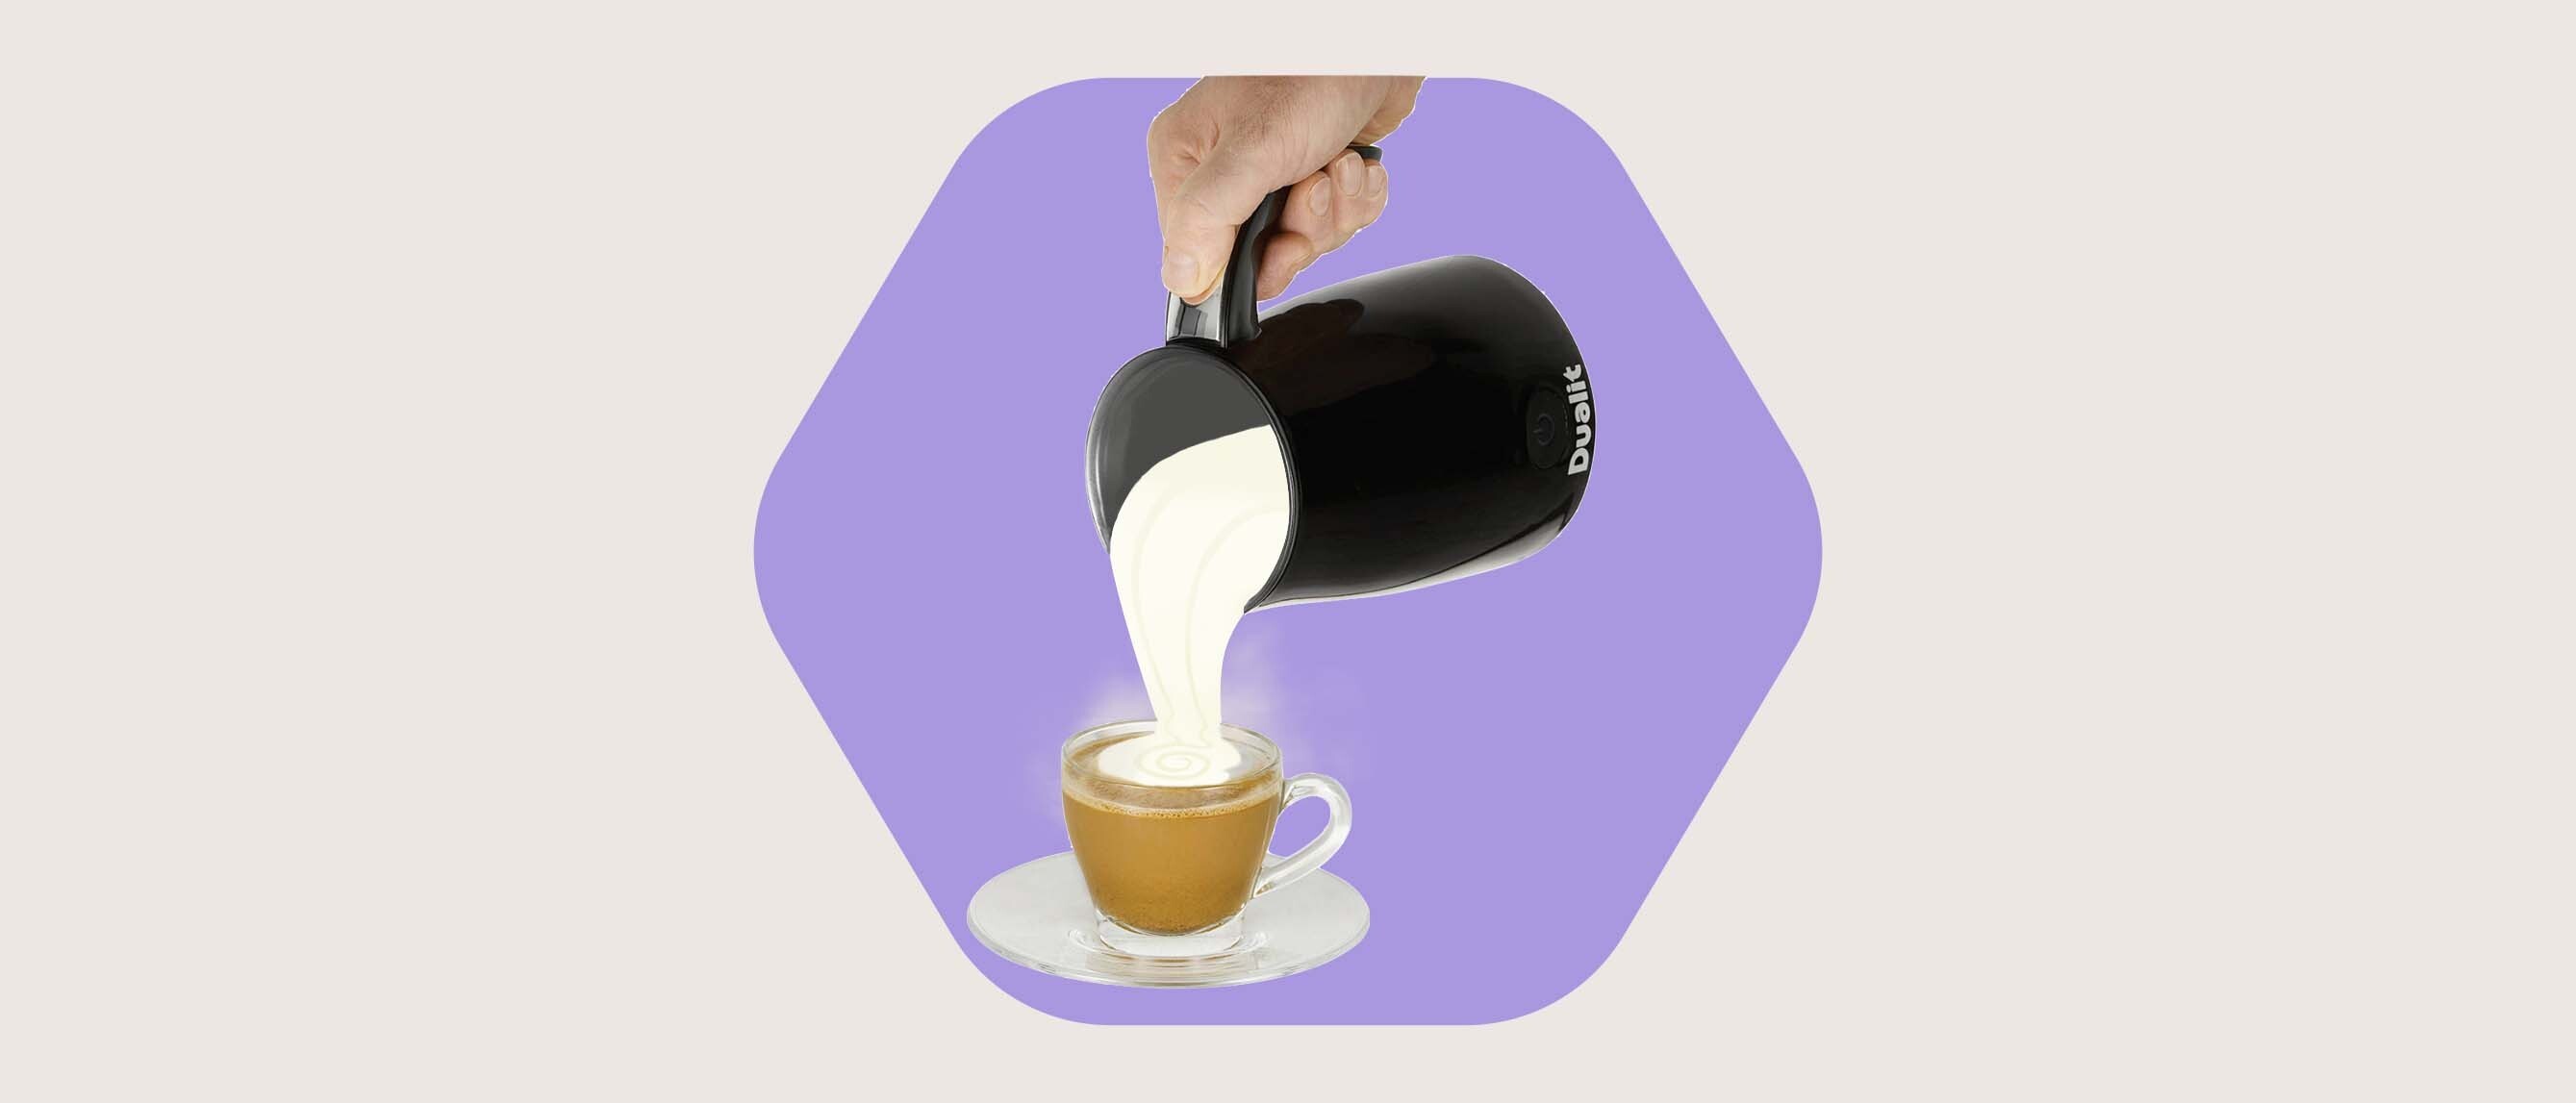 Dualit Handheld Milk Frother — Barista-Style Drinks at Home